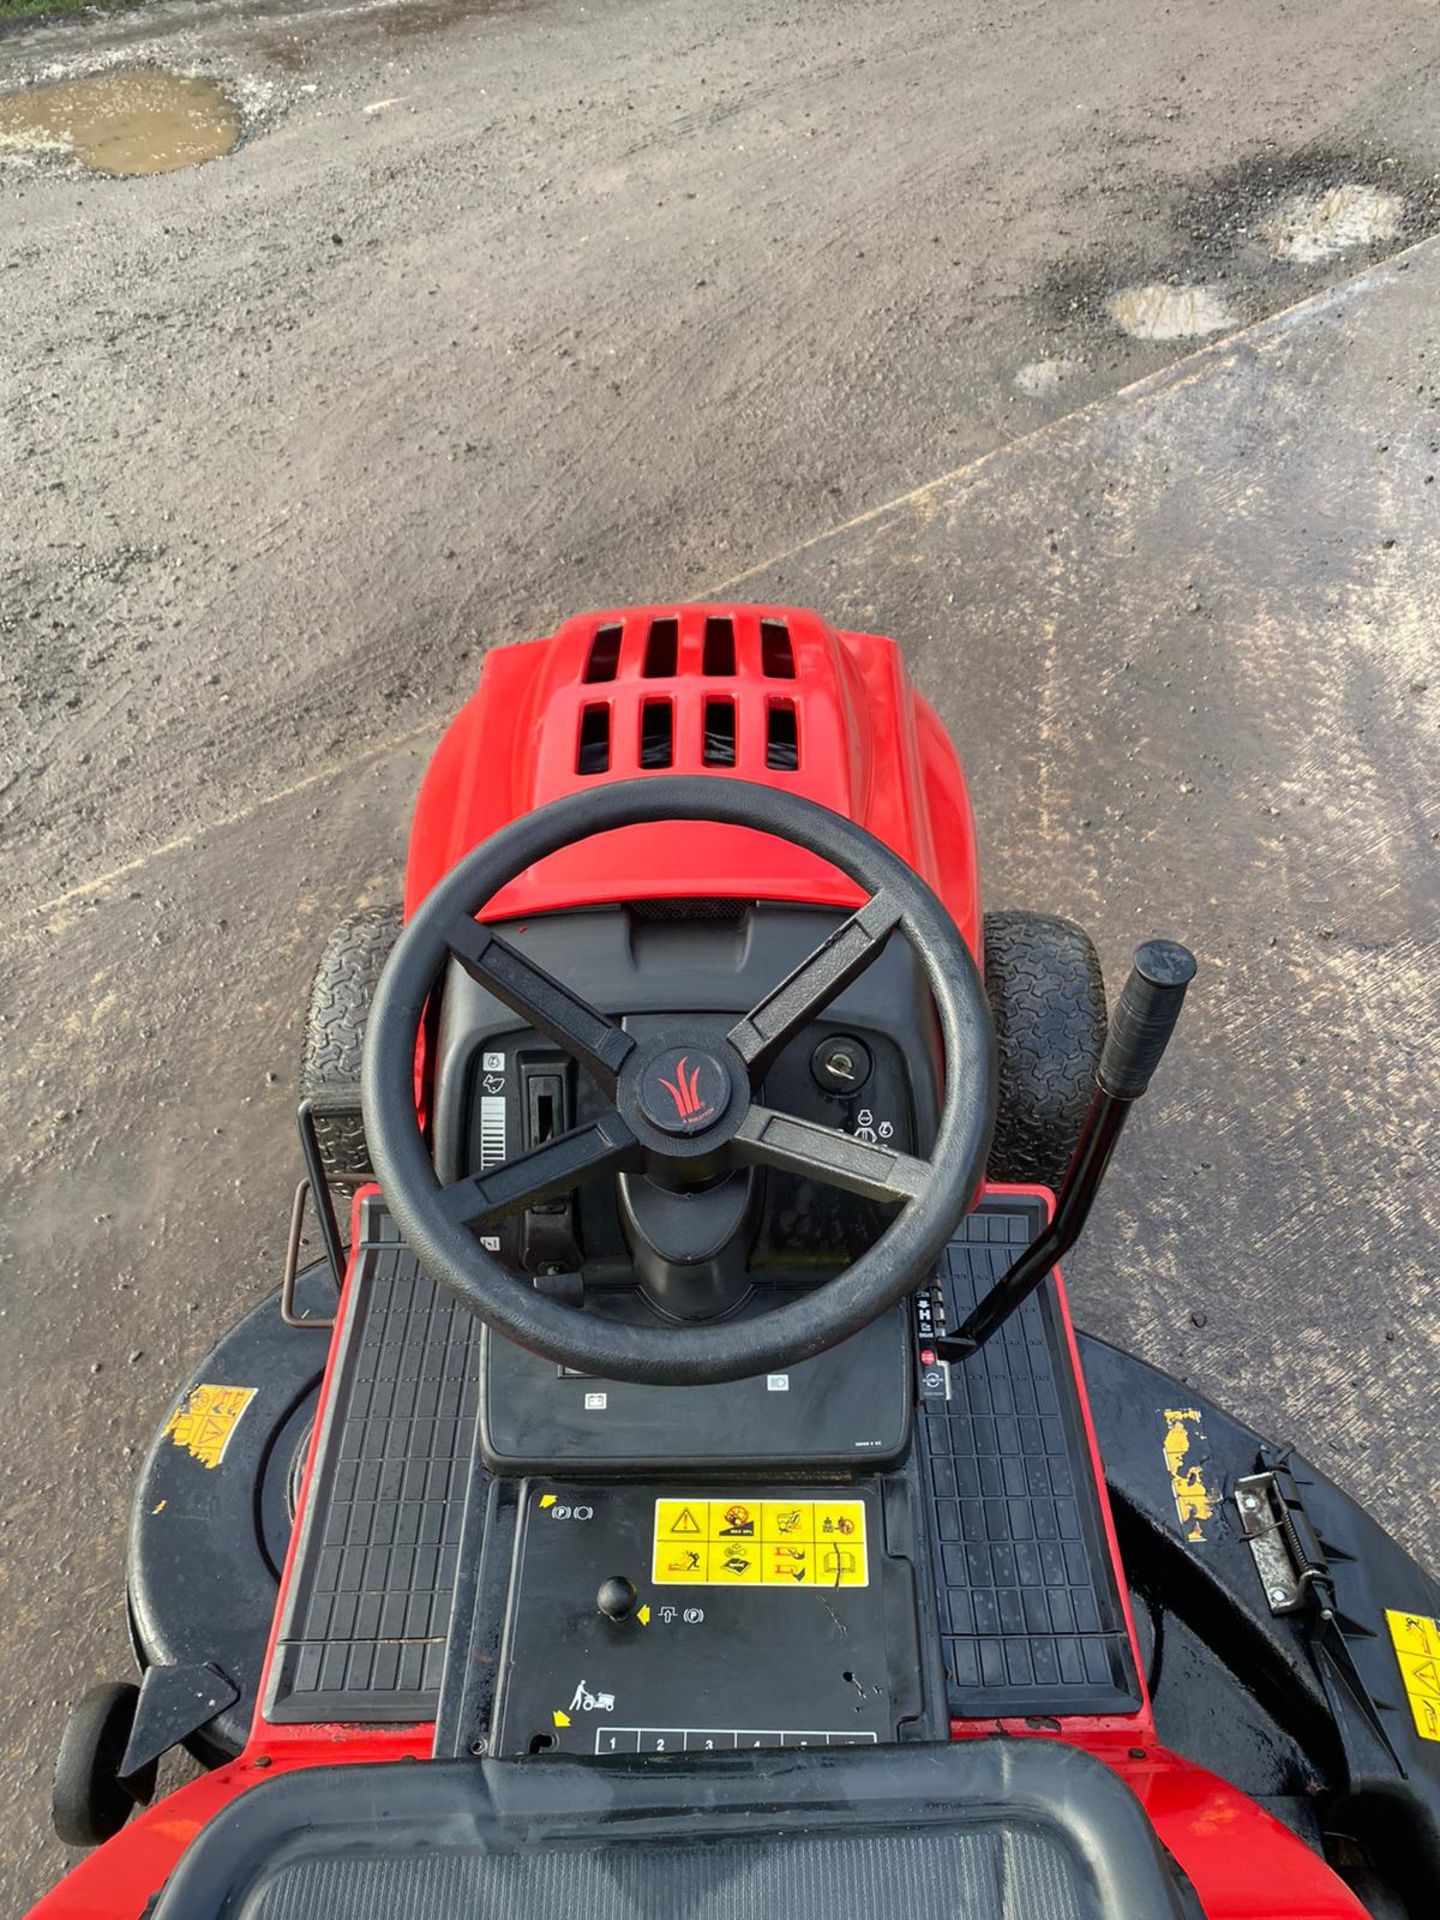 MTD H/165 HYDRO RIDE ON LAWN MOWER, RUNS, DRIVES AND CUTS, CLEAN MACHINE *NO VAT* - Image 3 of 7